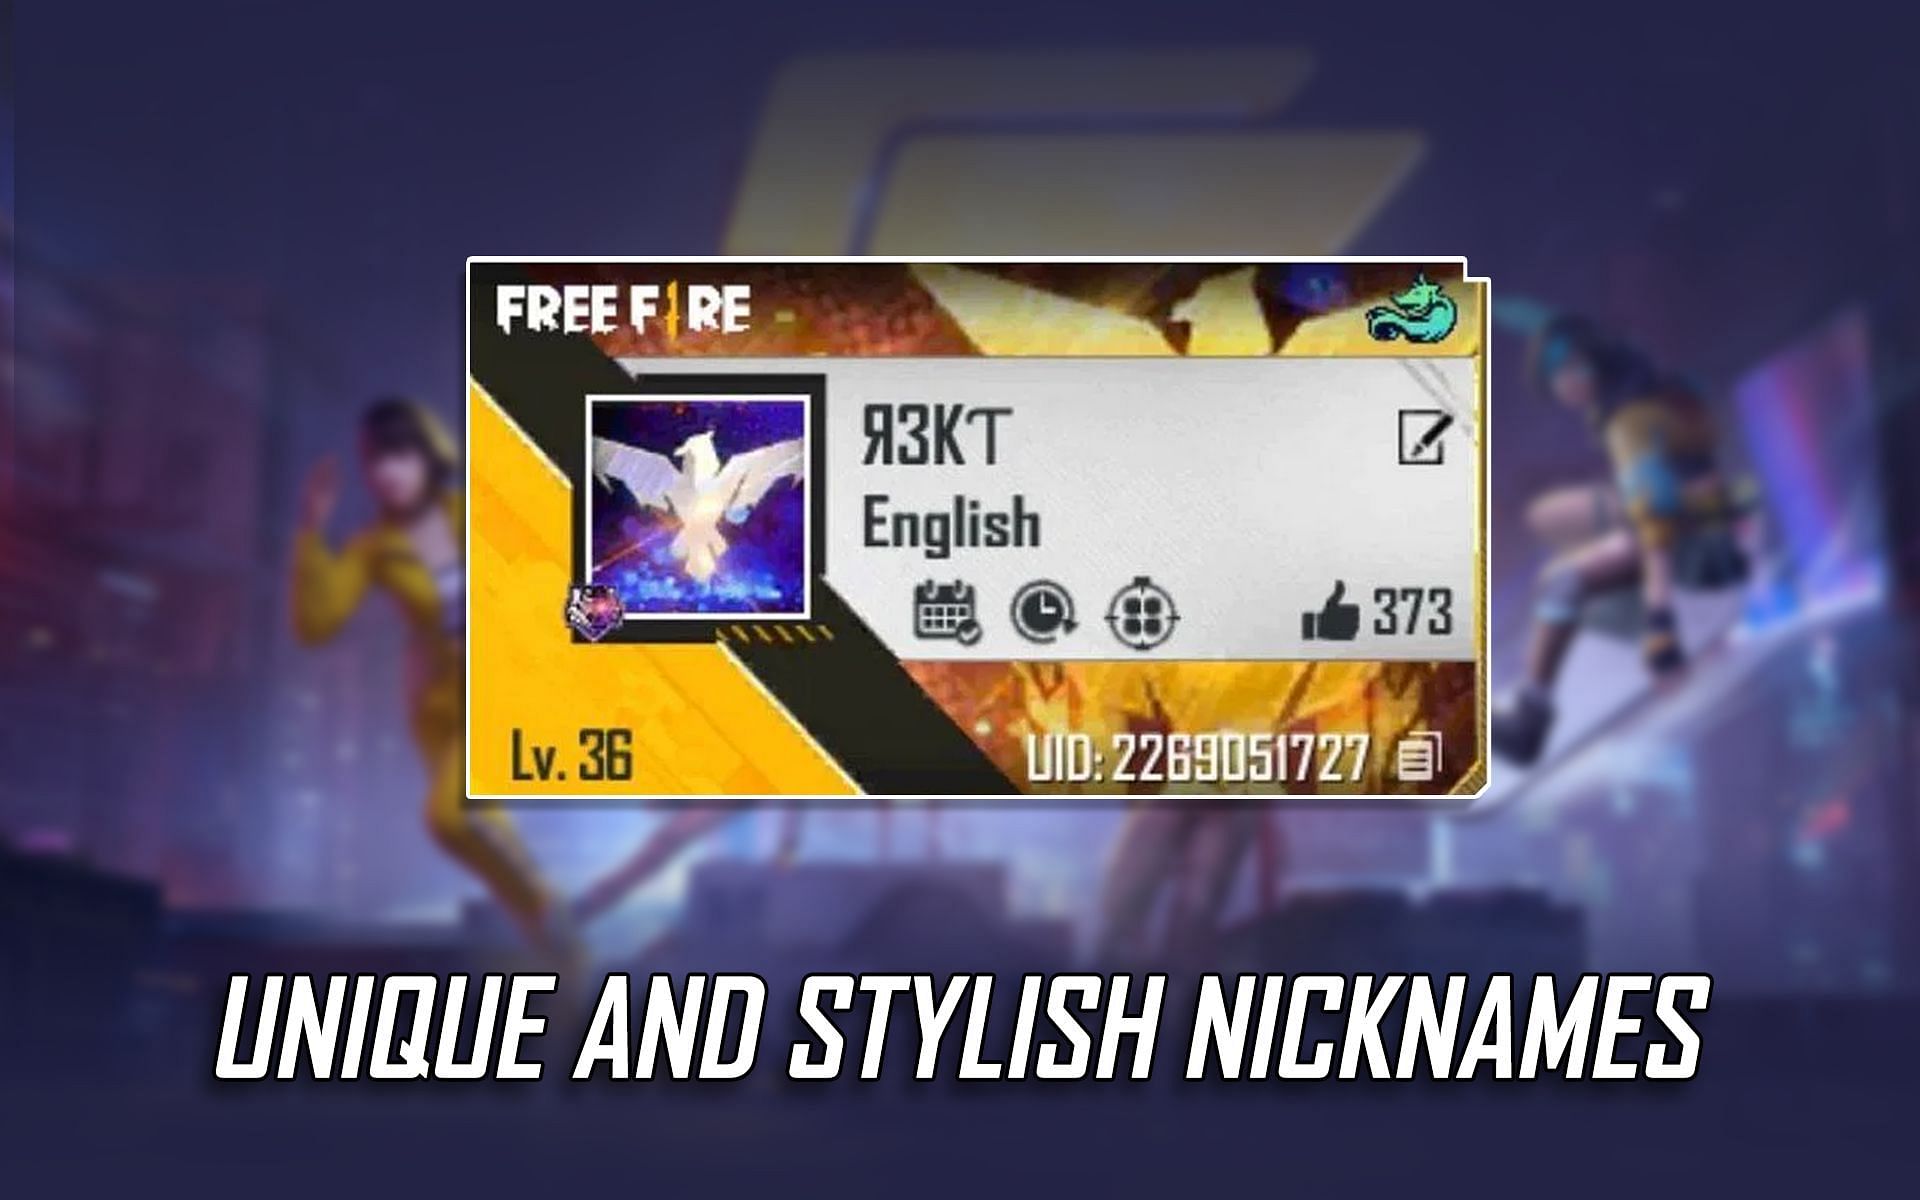 Many users want to get stylish names in Free Fire (Image via Sportskeeda)